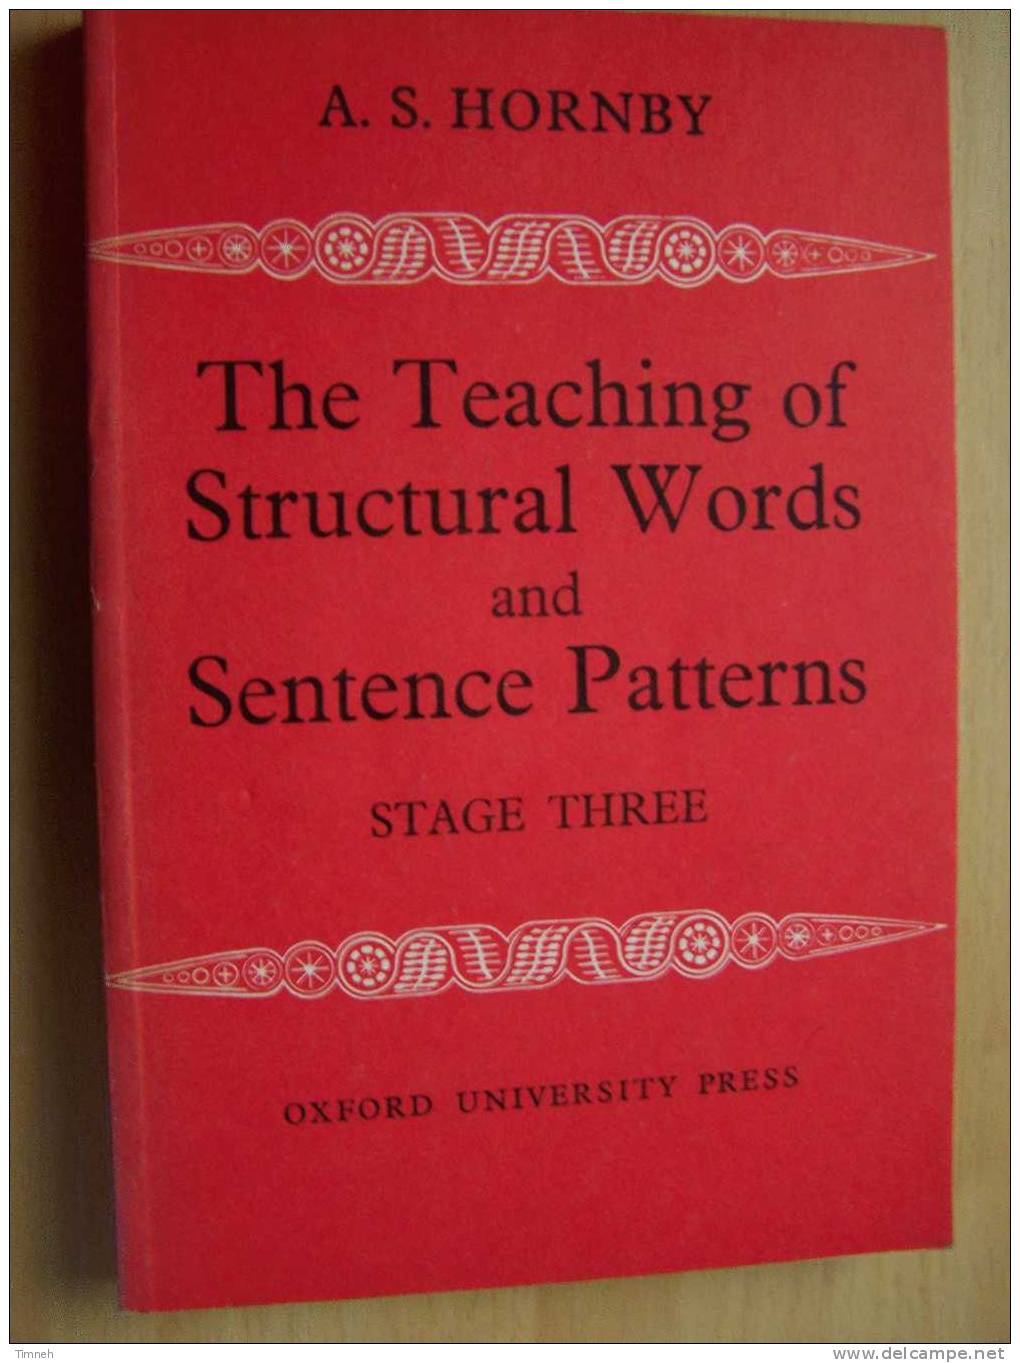 The Teaching Of Structural Words And Sentence Patterns-STAGE THREE-A.S.HORNBY-Oxford University Press-1969- - English Language/ Grammar